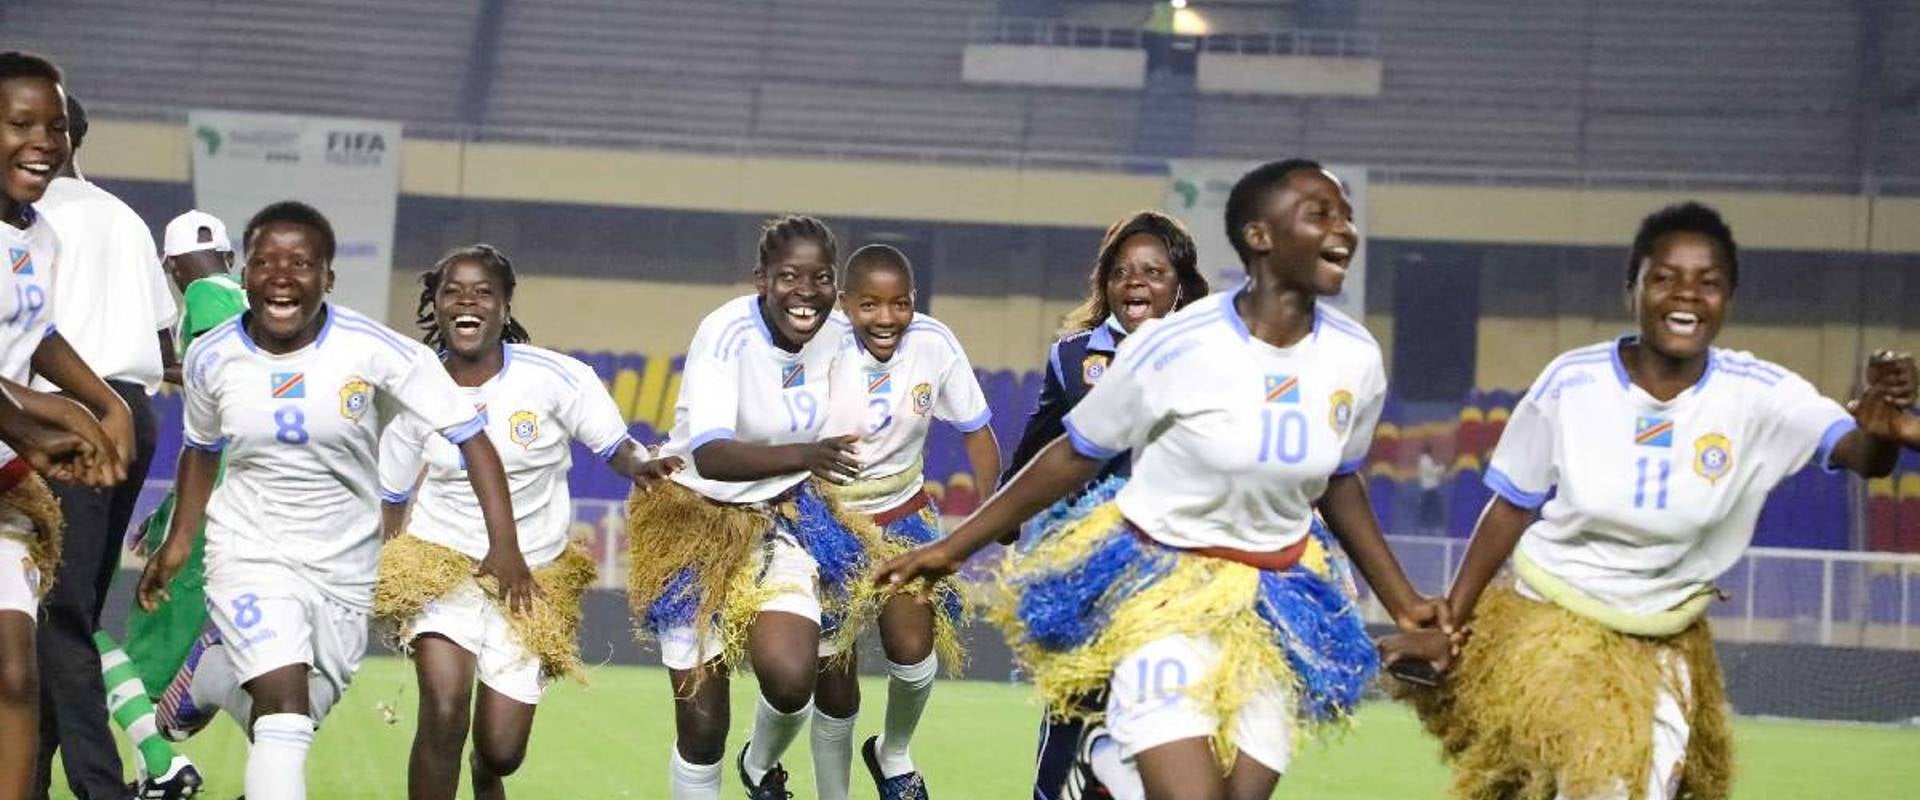 Congolese players of the 1st African School Champions Cup organized by FIFA celebrate after winning the competition.